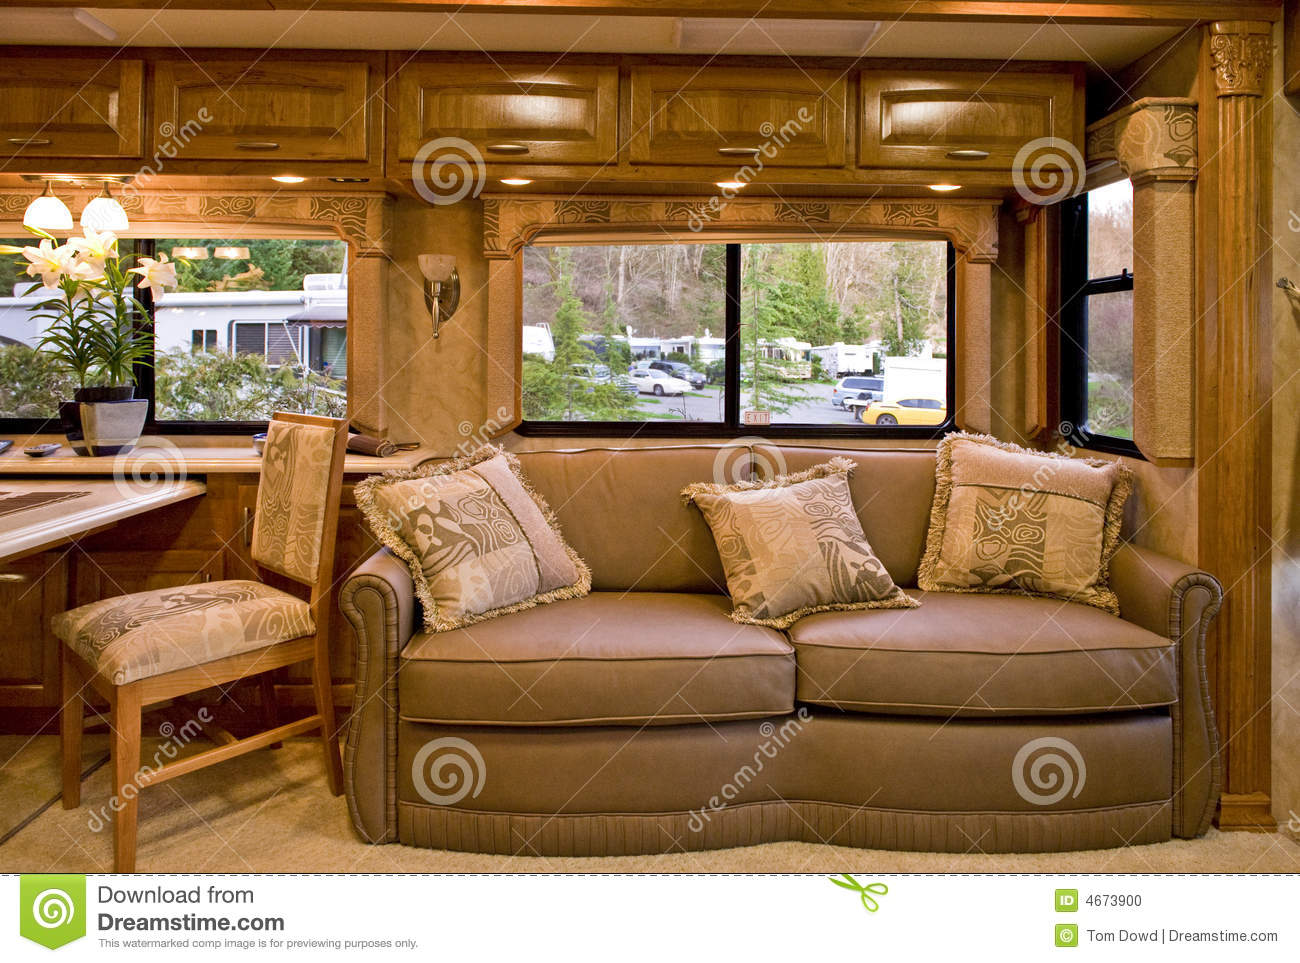 Related Image With Rv Windows